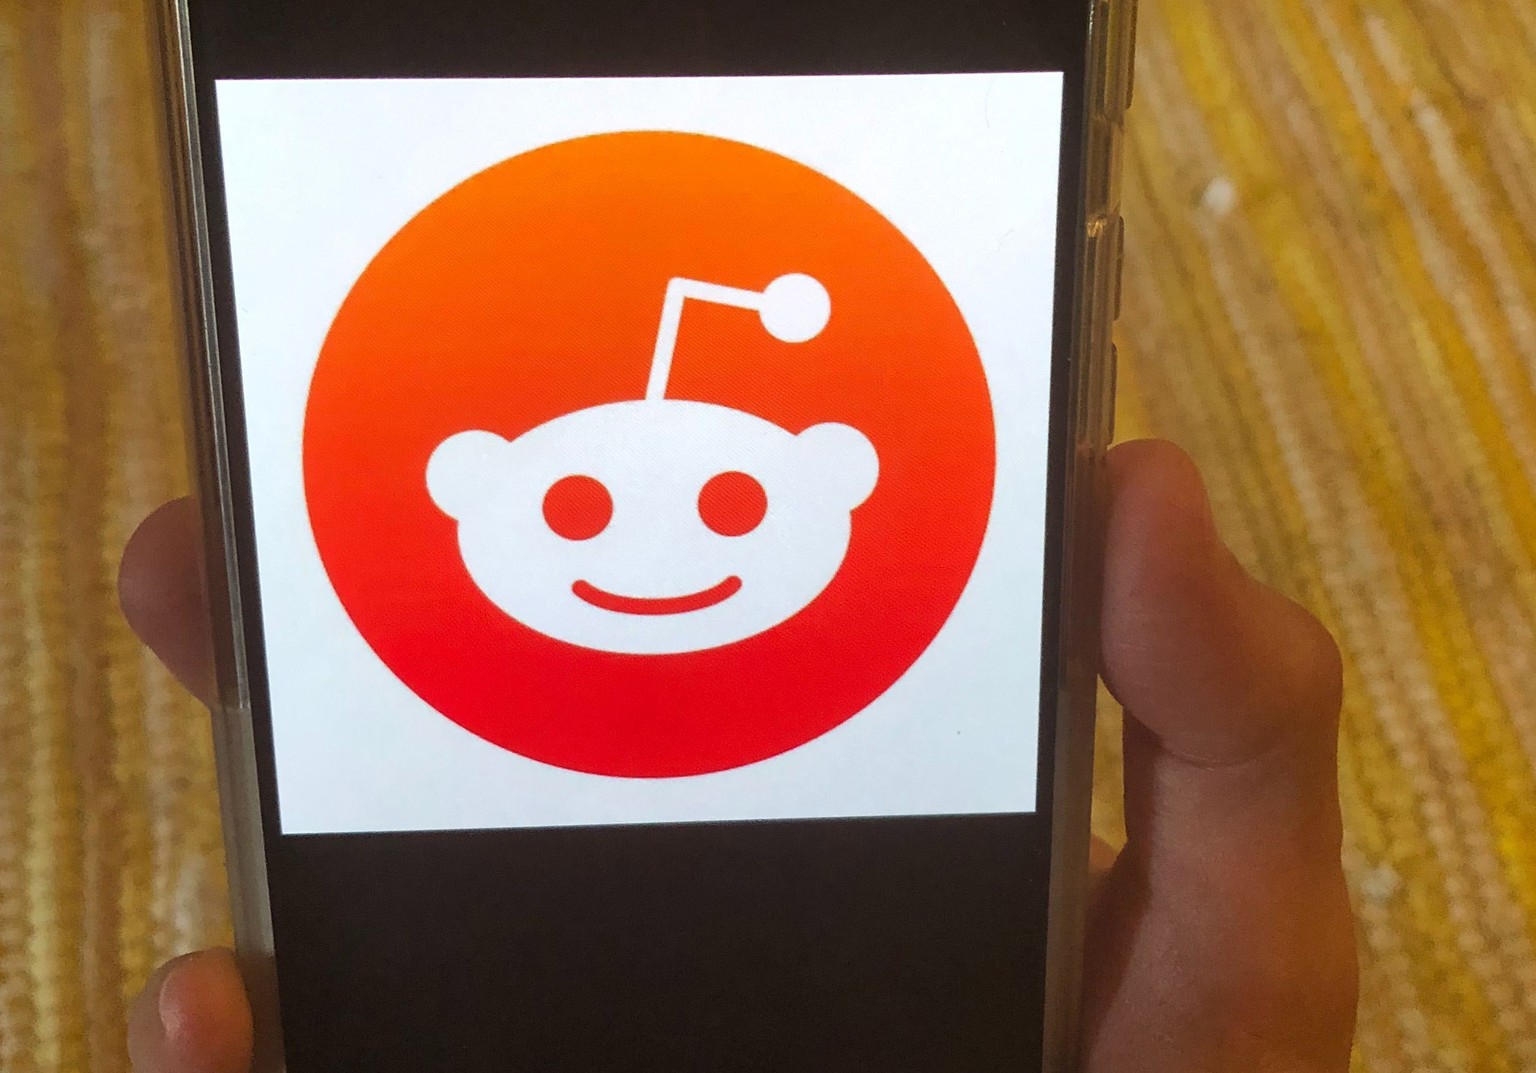 FILE - This June 29, 2020 file photo shows the Reddit logo on a mobile device in New York. Reddit struck a deal with Google that allows the search giant to use posts from the online discussion site fo ...